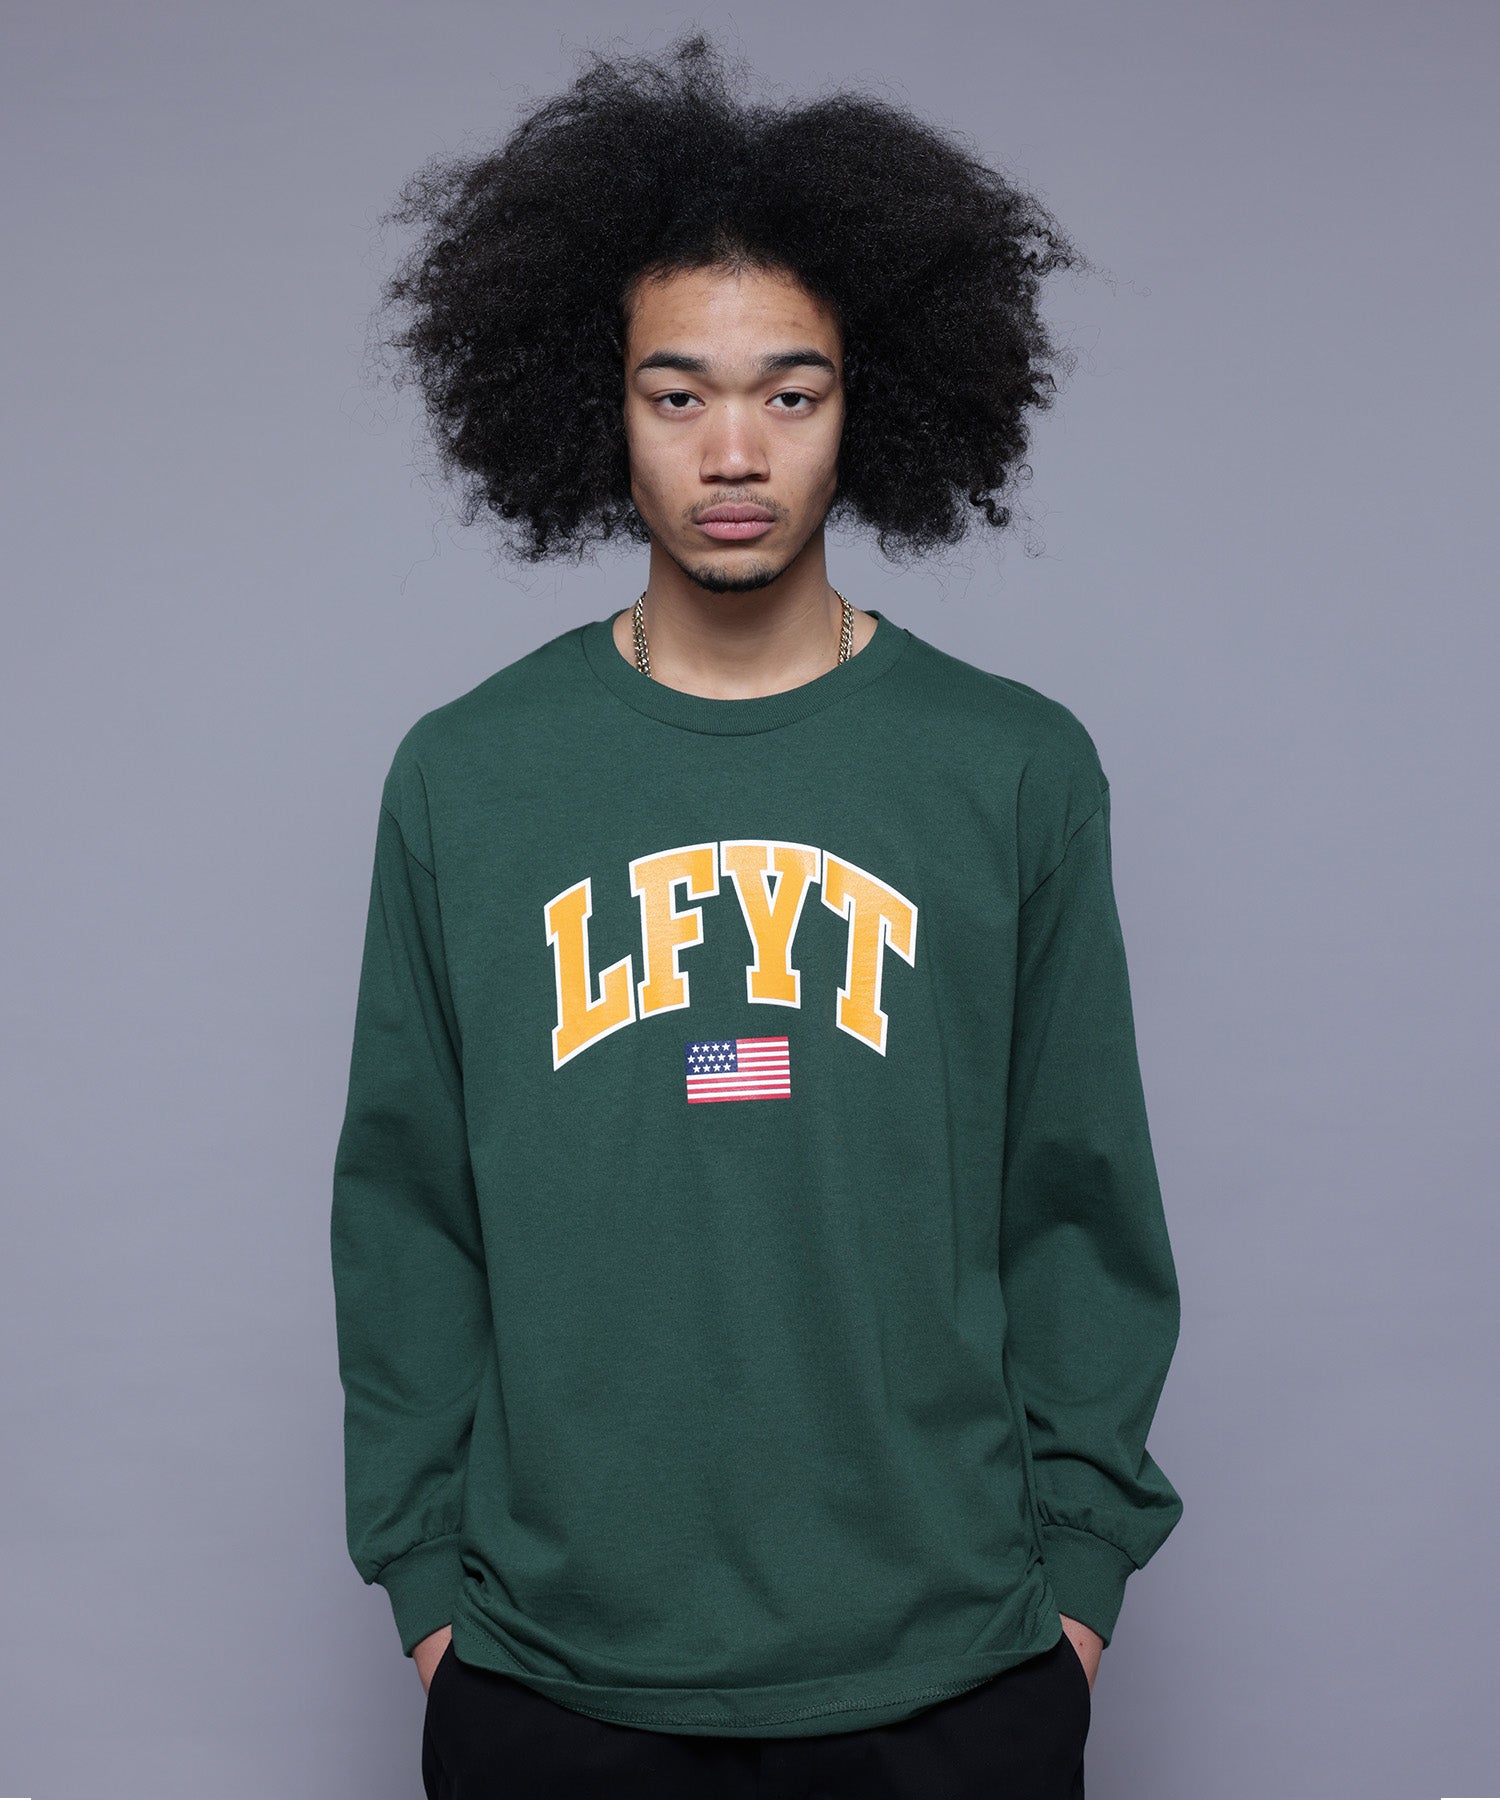 LFYT OLD GLORY ARCH LOGO L/S TEE LS220103 NAVY